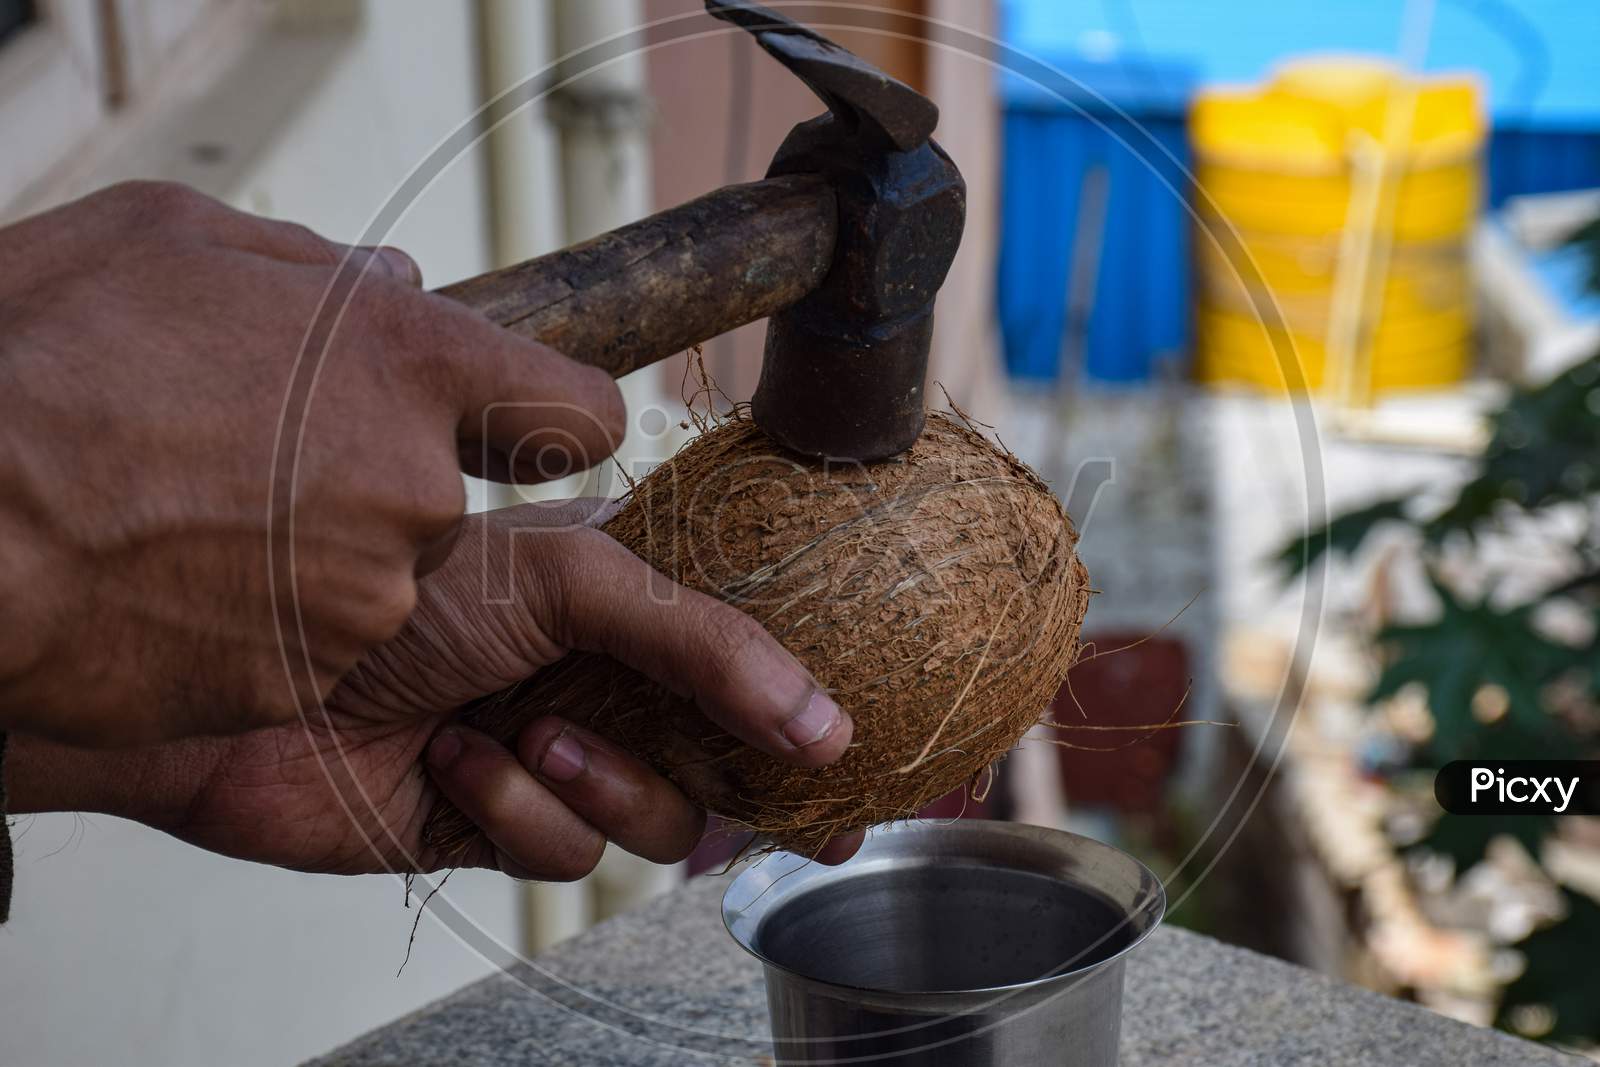 Picture Of A Man Breaking Raw Coconut From Hammer